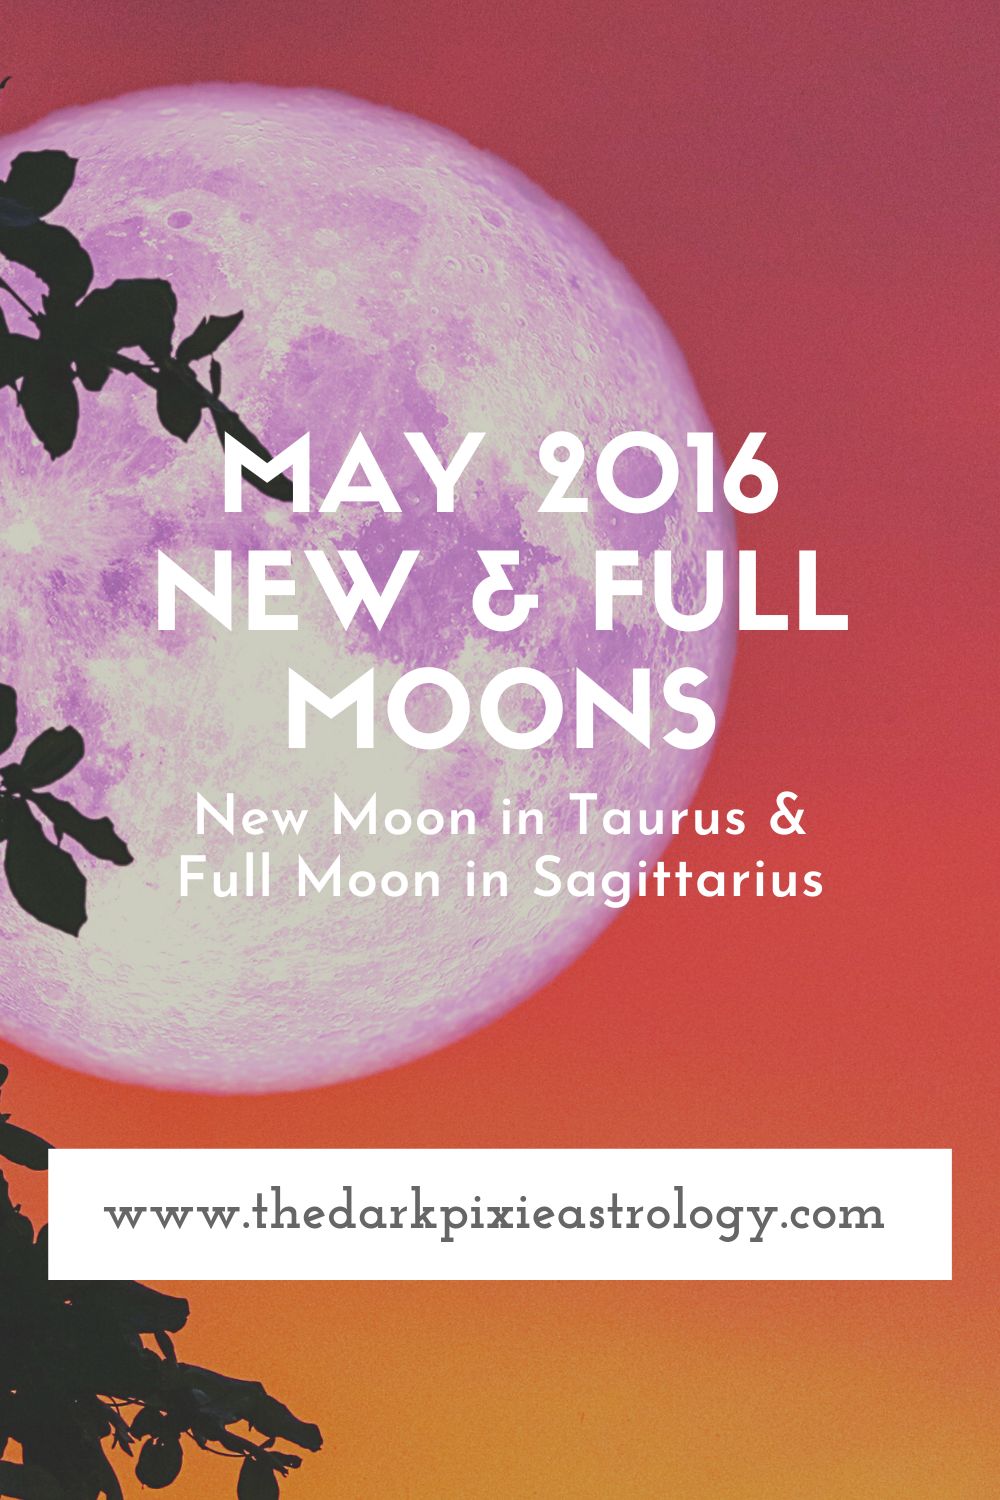 May 2016 New & Full Moons - The Dark Pixie Astrology